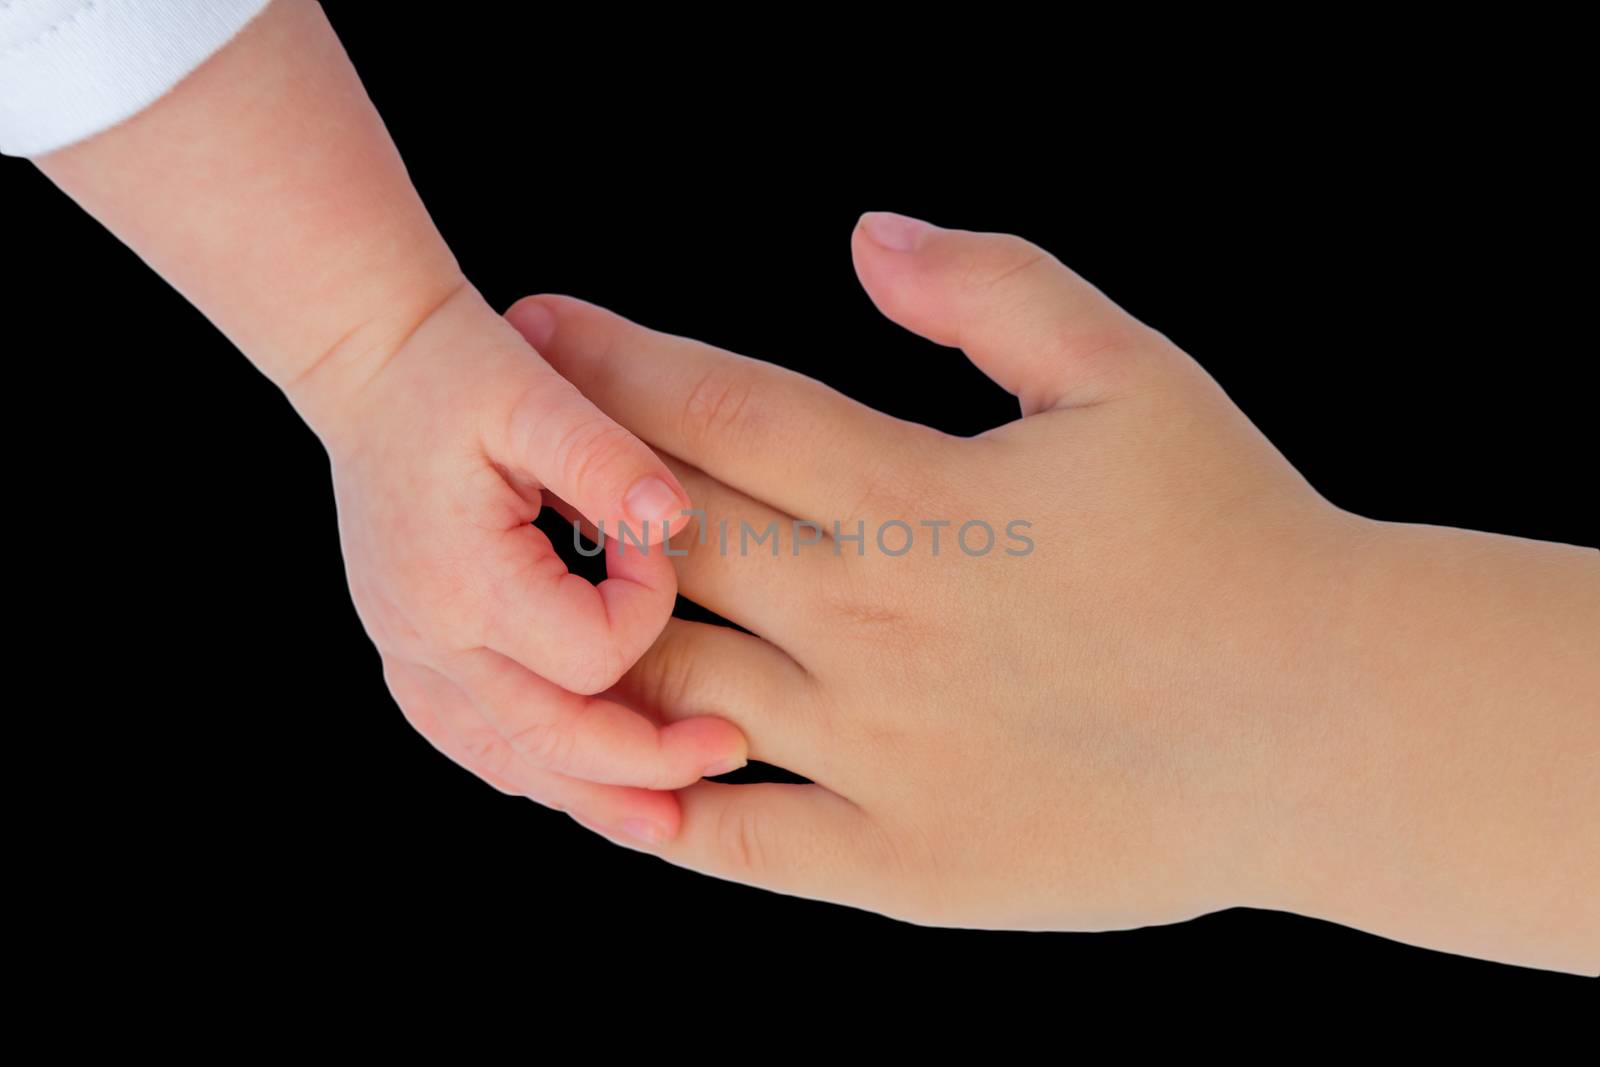 Hand of newborn baby touching hand of child isolated on black background